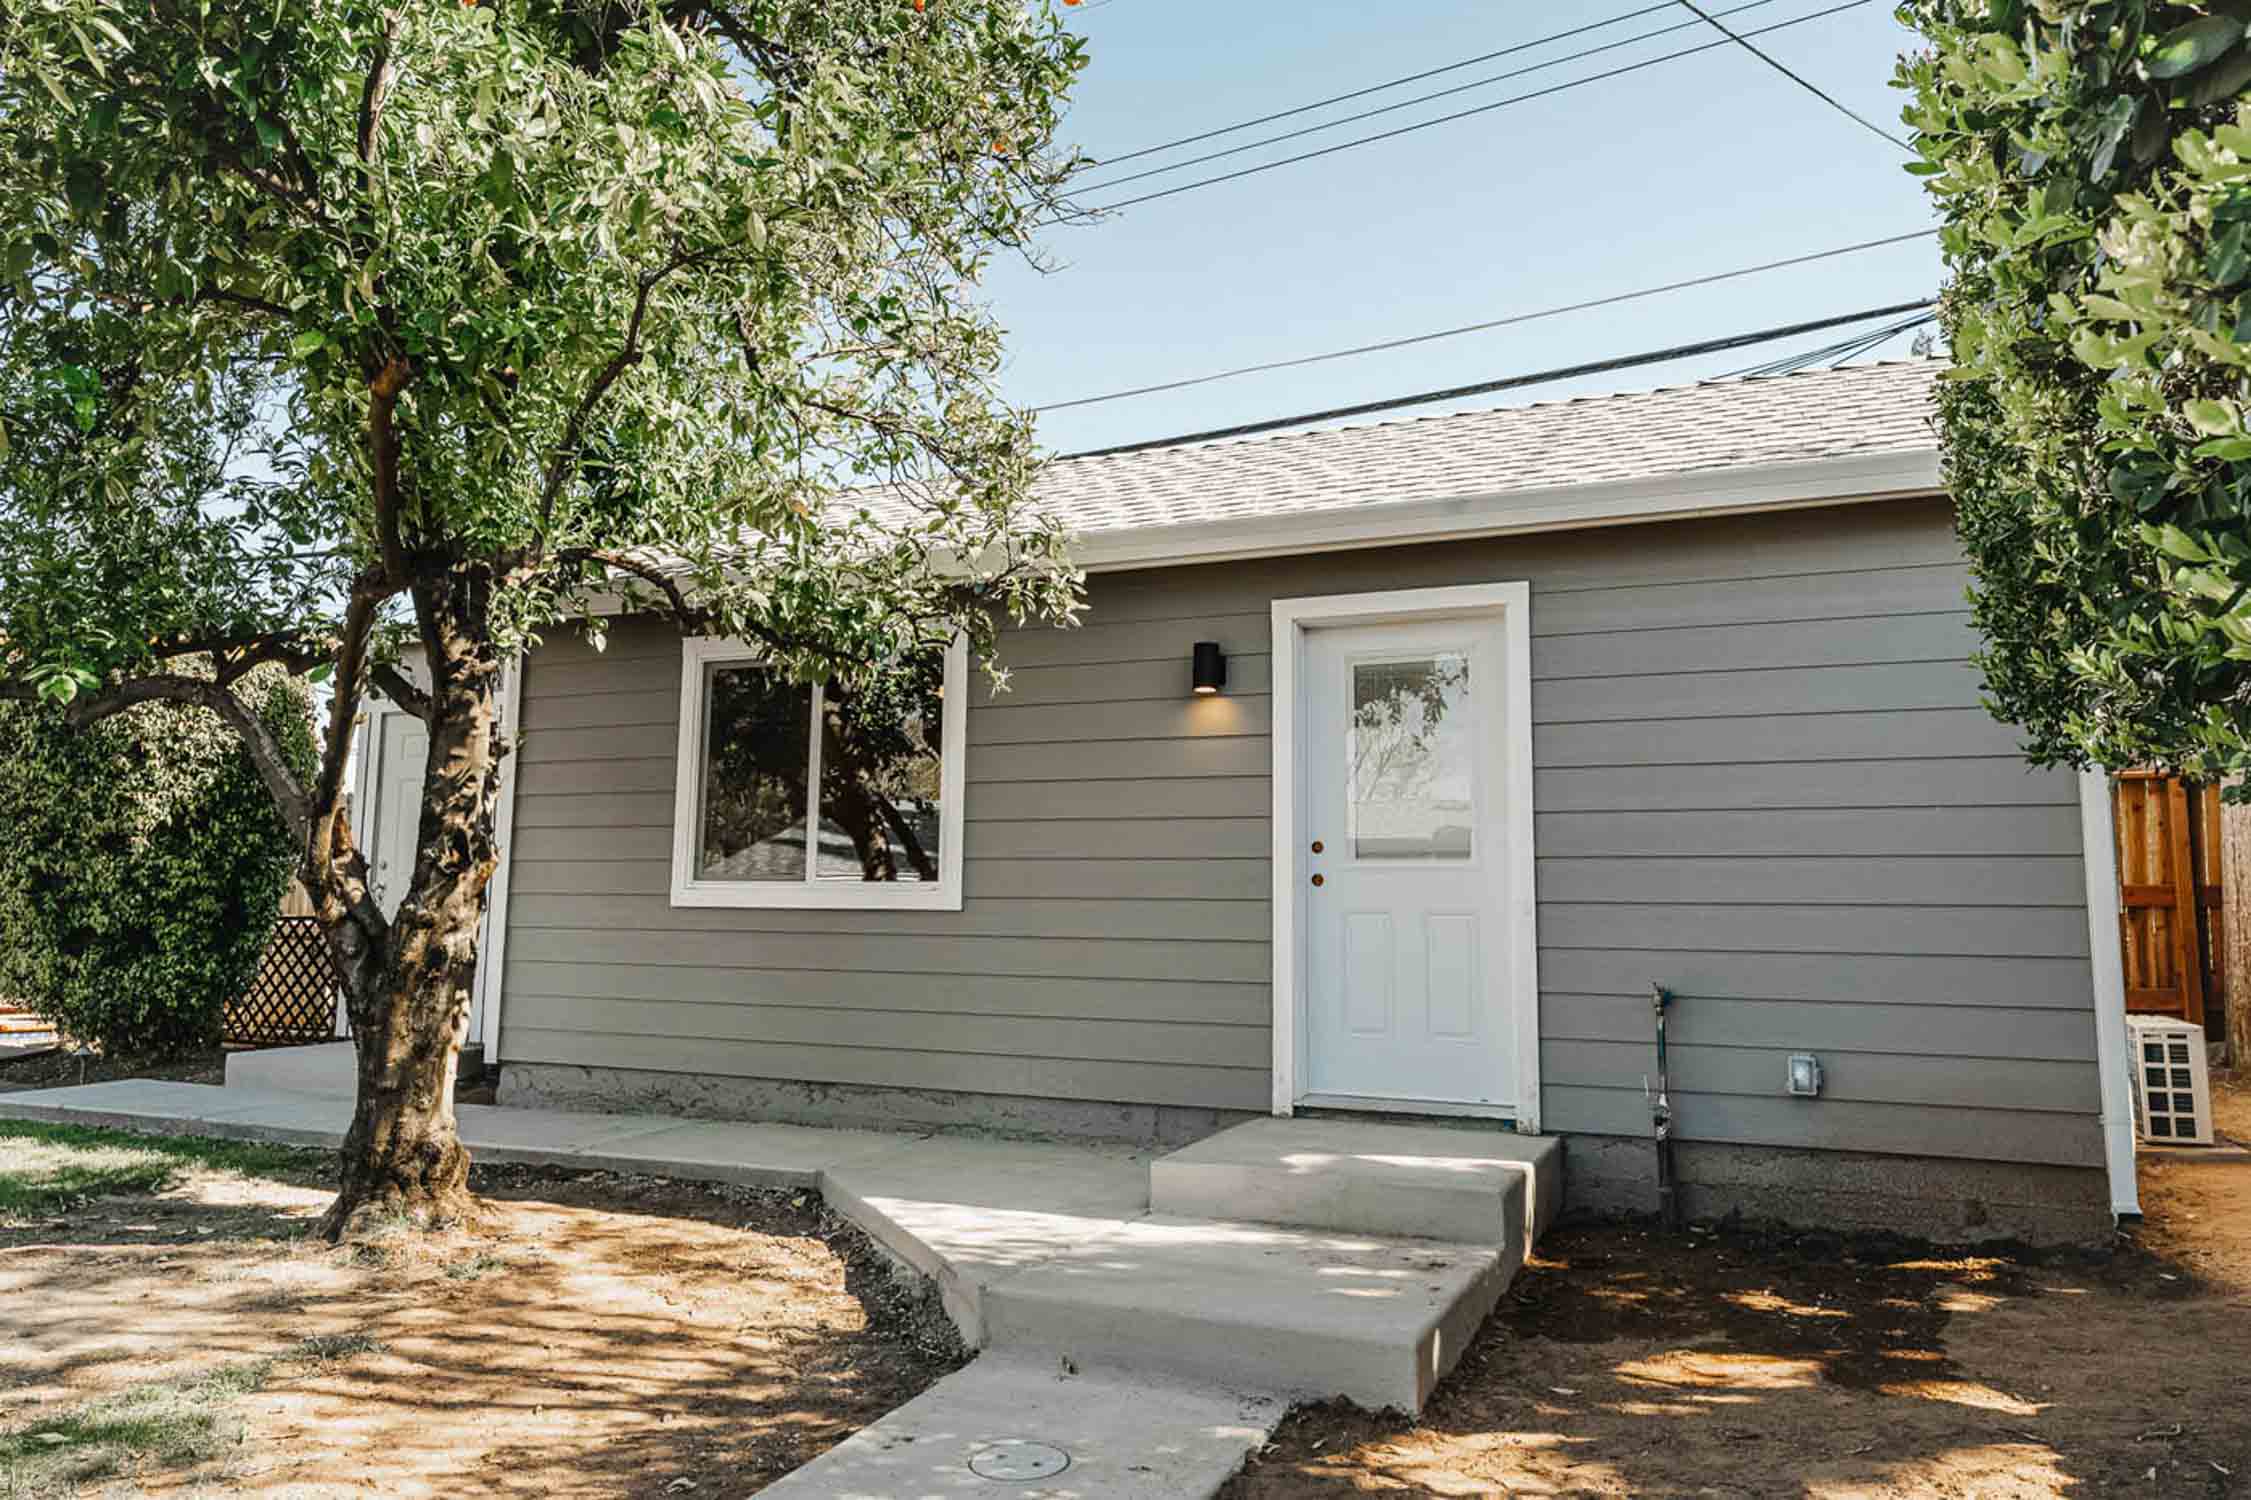 A studio adu model built by professionals at Anchored Tiny Homes North Central San Antonio.